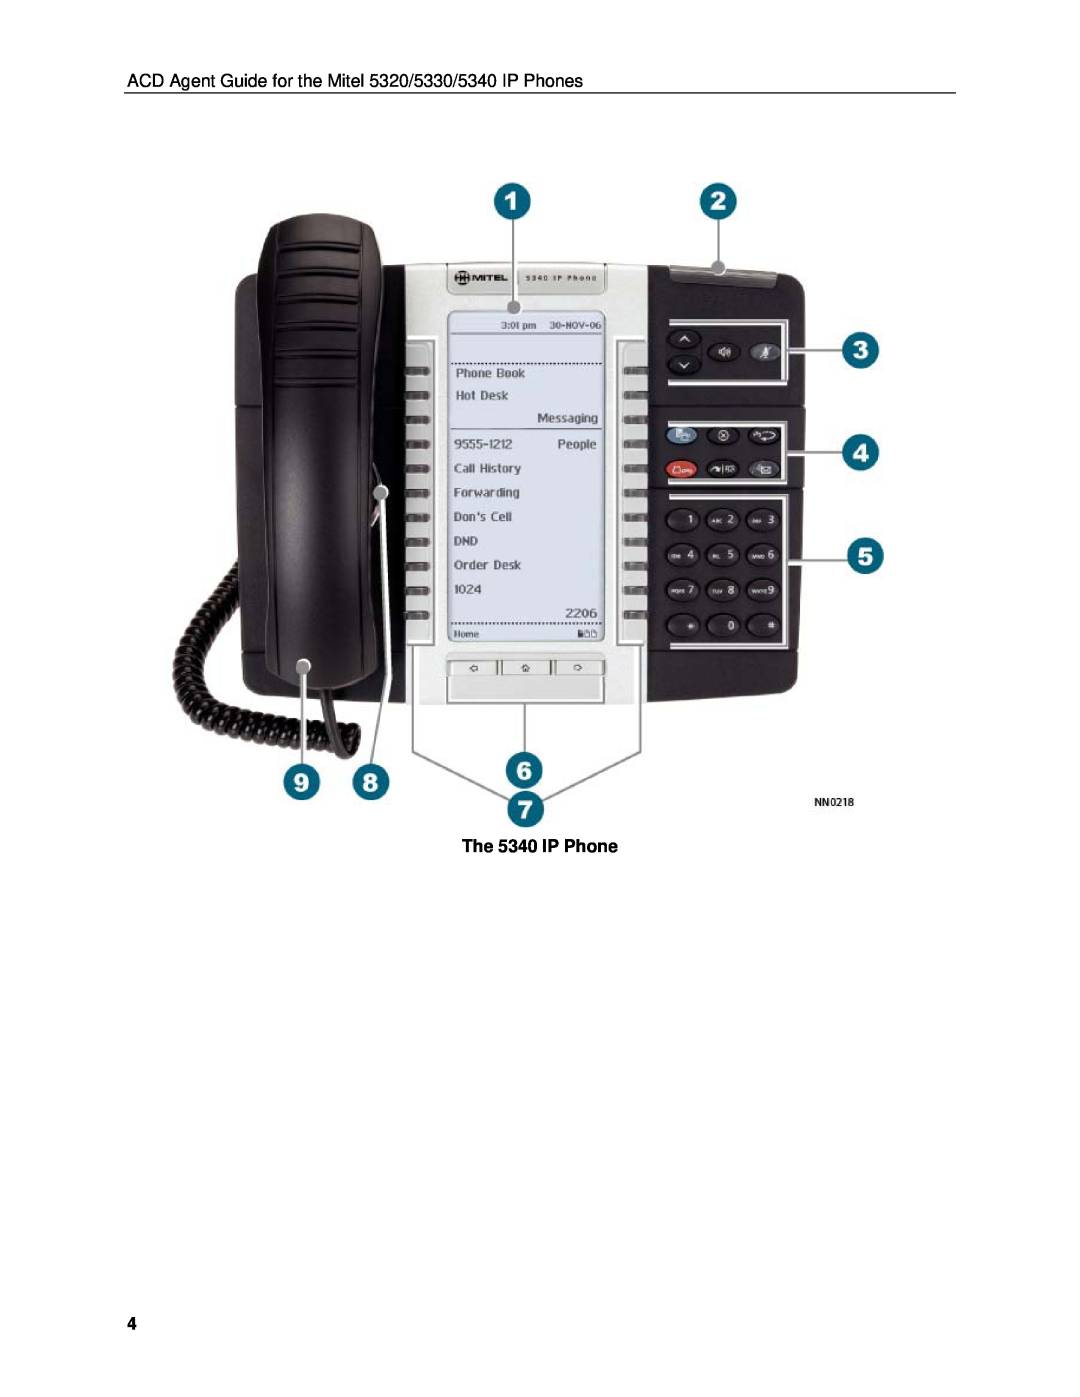 Mitel manual The 5340 IP Phone, ACD Agent Guide for the Mitel 5320/5330/5340 IP Phones 